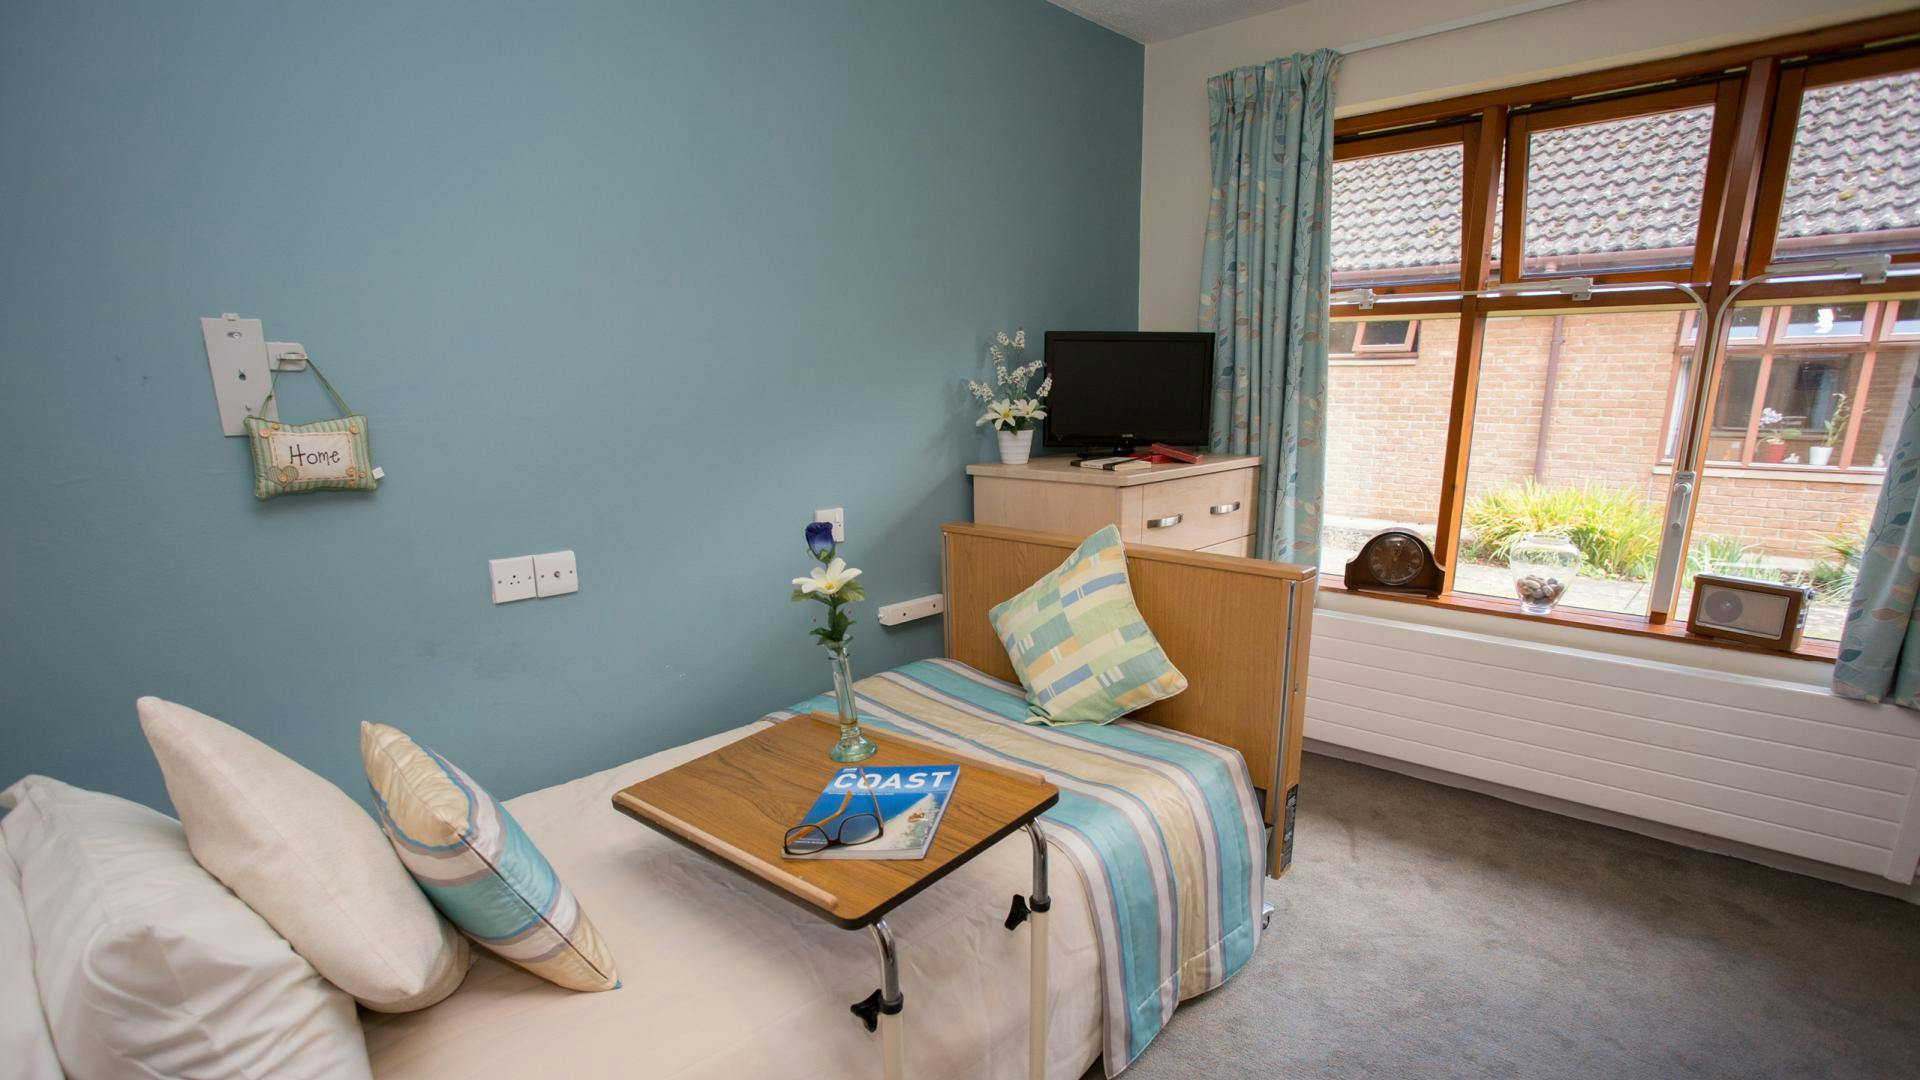 Bedroom at Lake House Care Home in Banbury, Oxfordshire